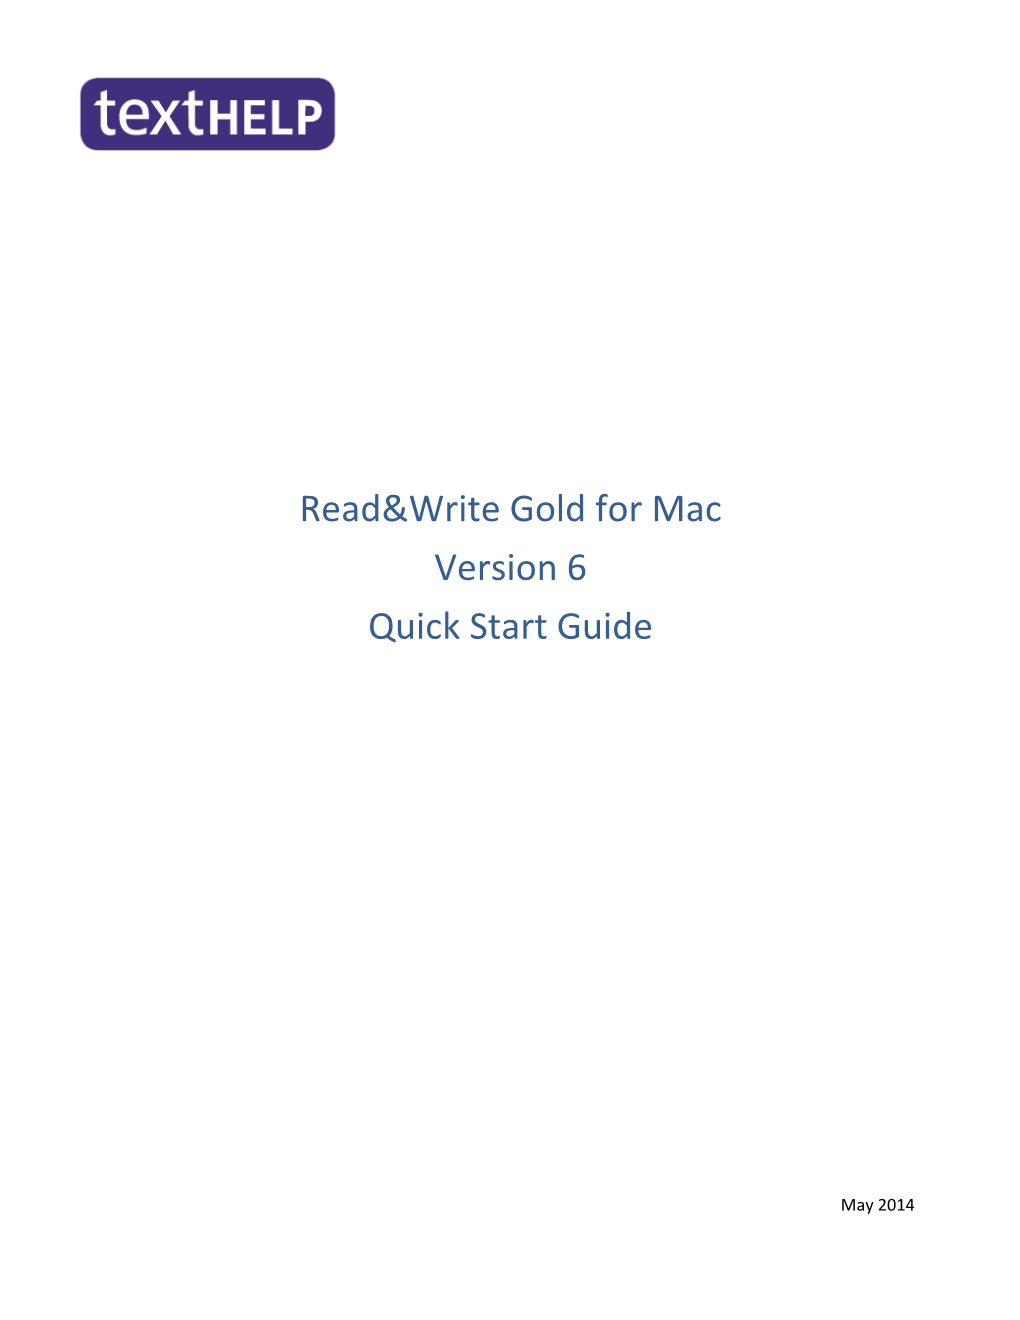 Read&Write Gold for Mac Version 6 Quick Start Guide